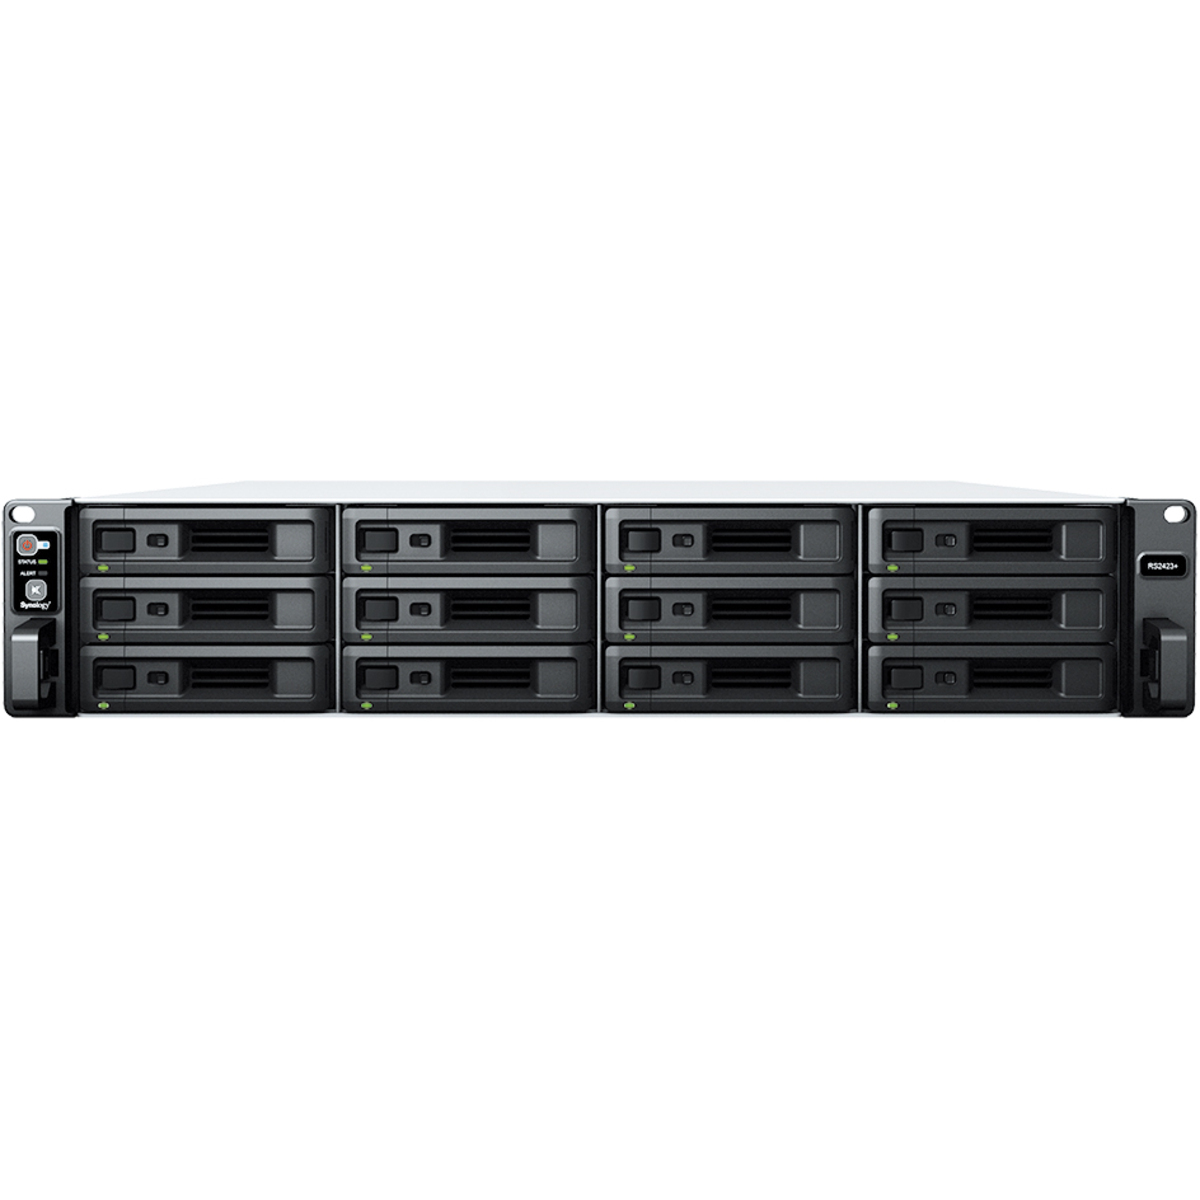 Synology RackStation RS2423RP+ 160tb 12-Bay RackMount Multimedia / Power User / Business NAS - Network Attached Storage Device 10x16tb Seagate IronWolf Pro ST16000NT001 3.5 7200rpm SATA 6Gb/s HDD NAS Class Drives Installed - Burn-In Tested - ON SALE - FREE RAM UPGRADE RackStation RS2423RP+